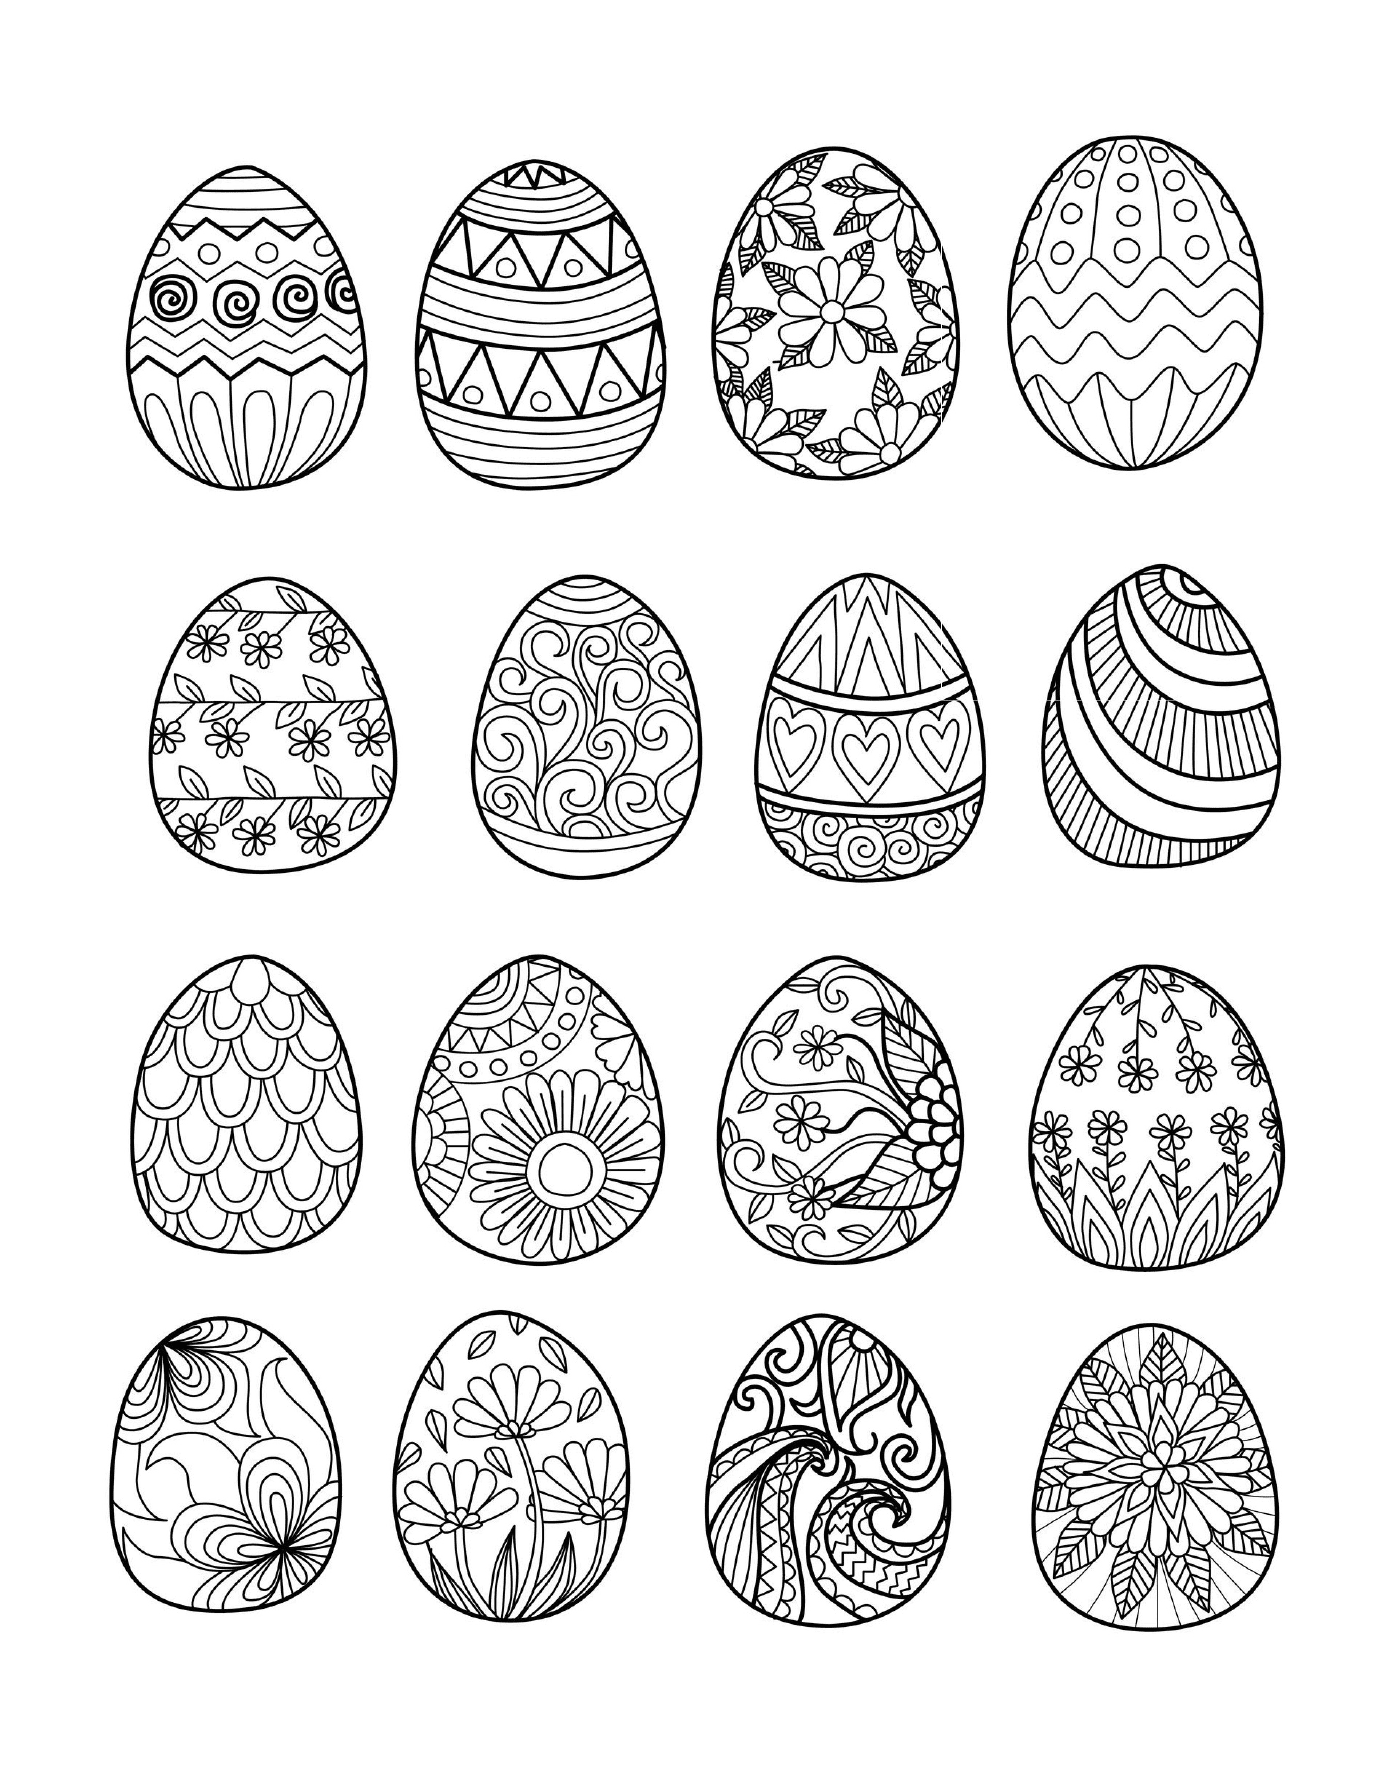  Easter eggs for adults 2 by Bimdeedee, a set of colorful eggs 